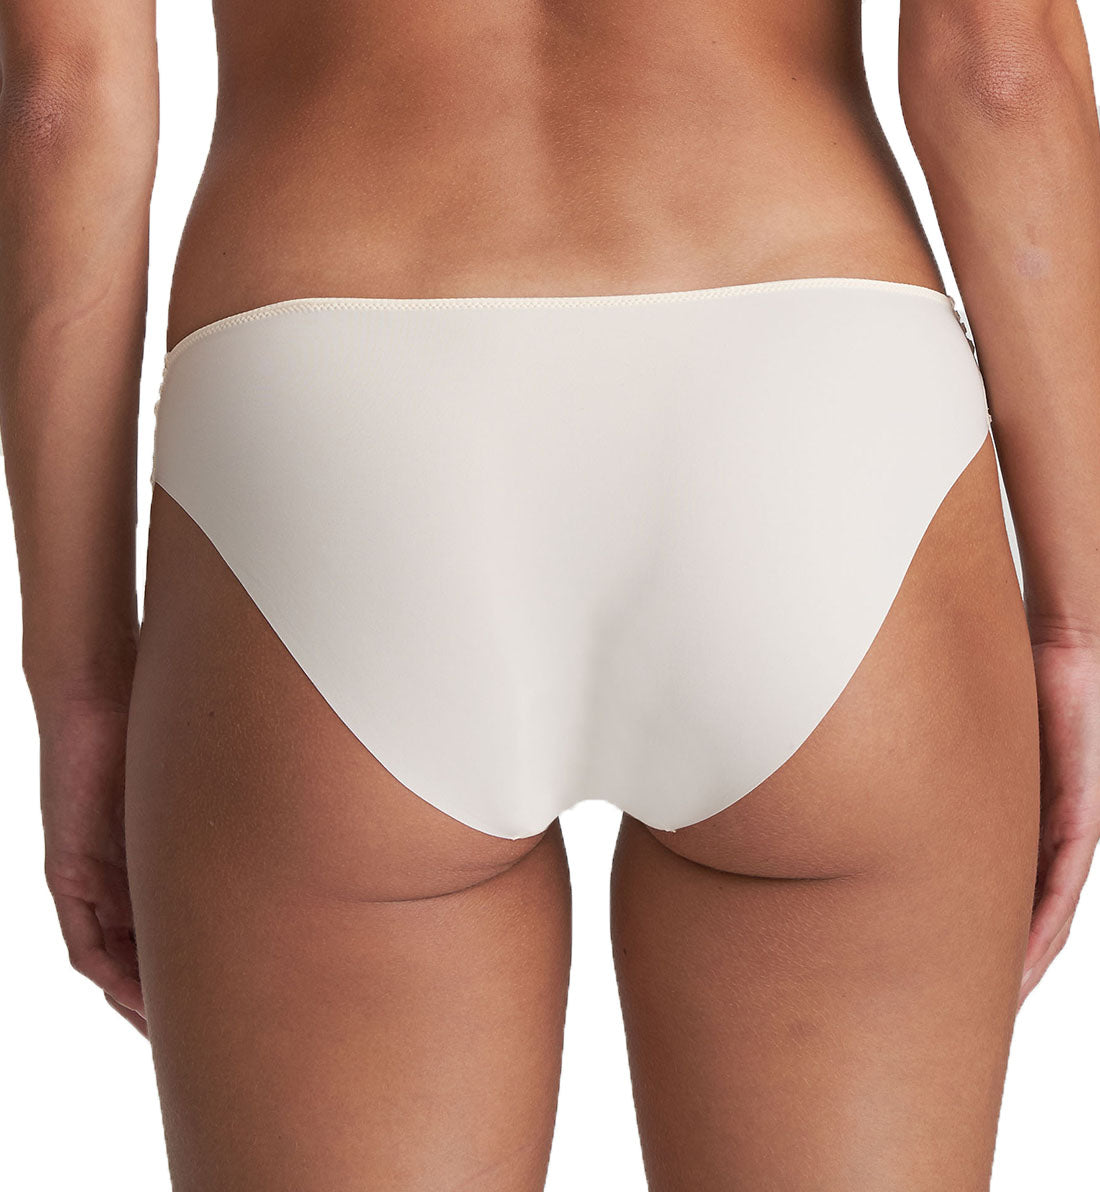 Marie Jo Nathy Matching Rio Brief (0502480),XXL,Pearled Ivory - Pearled Ivory,XXL